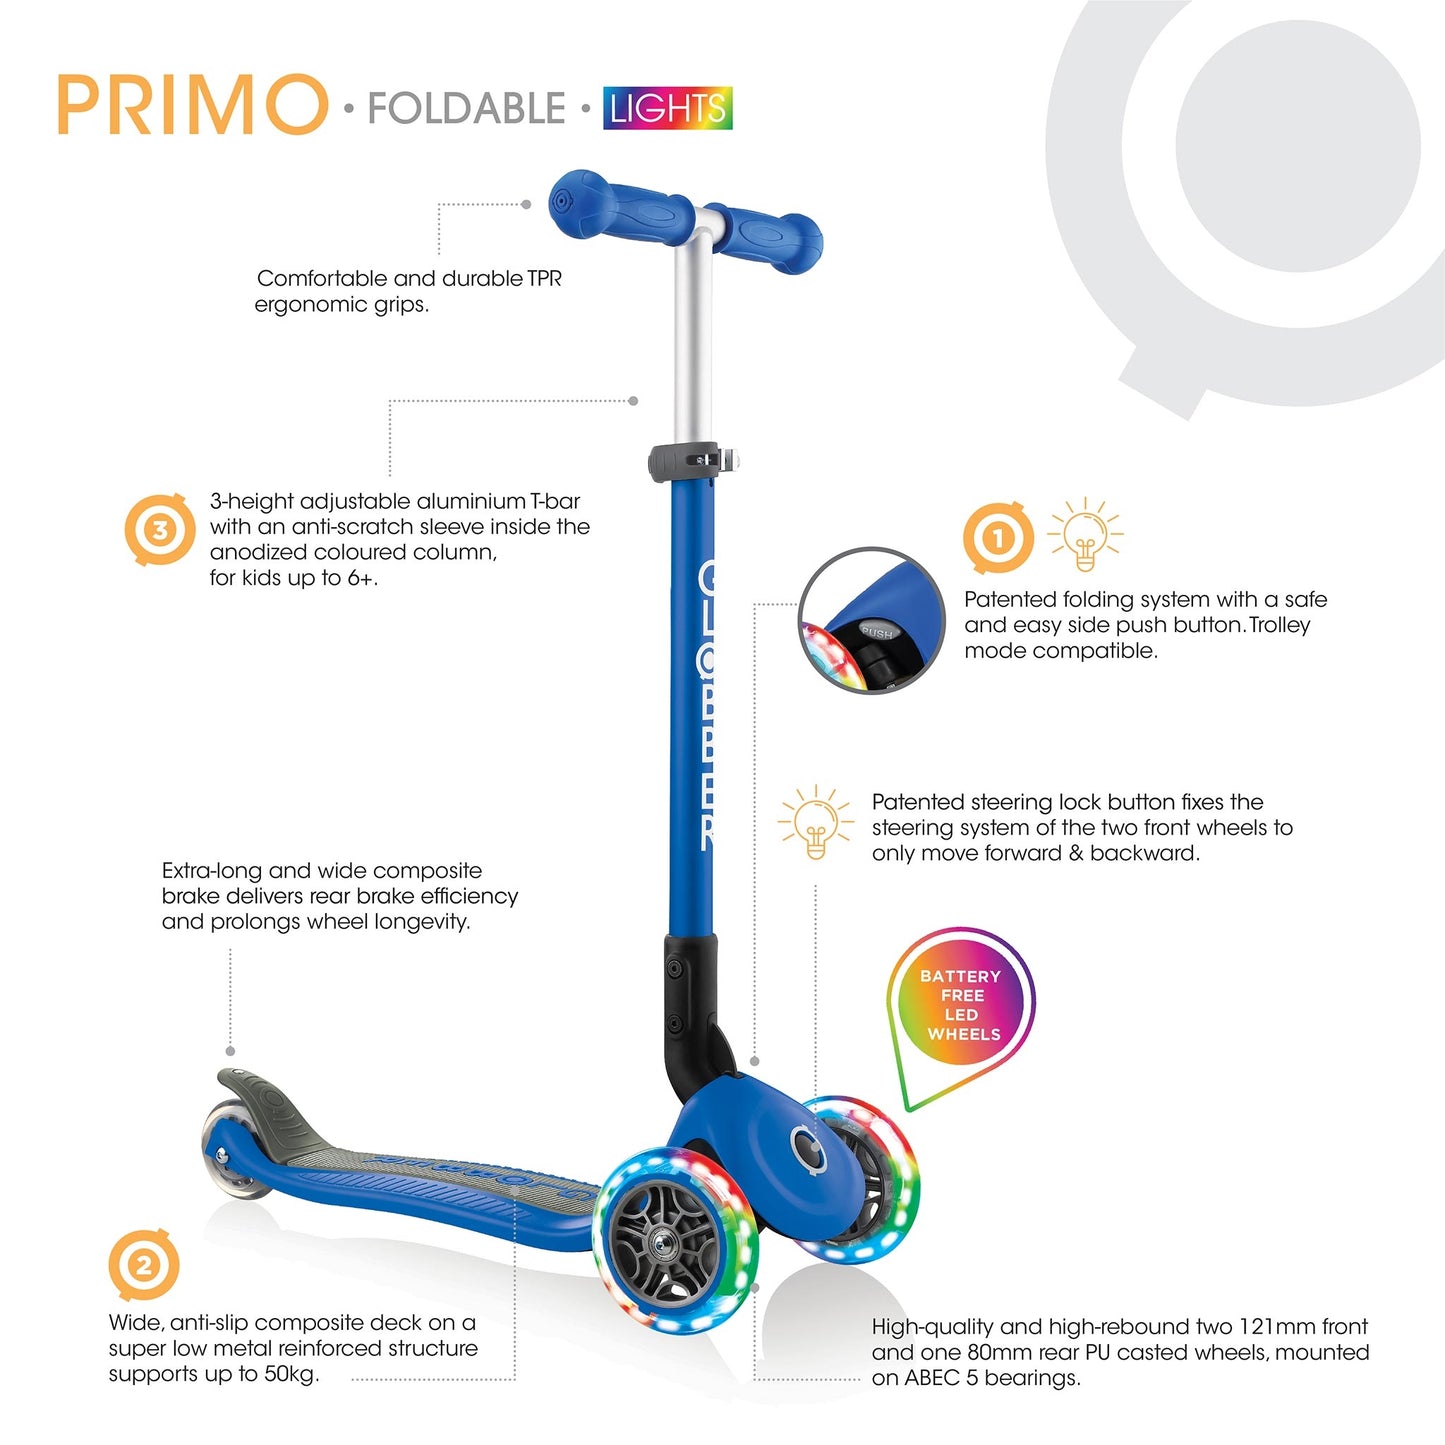 Patinete Globber con luces - Primo Foldable Lights Azul